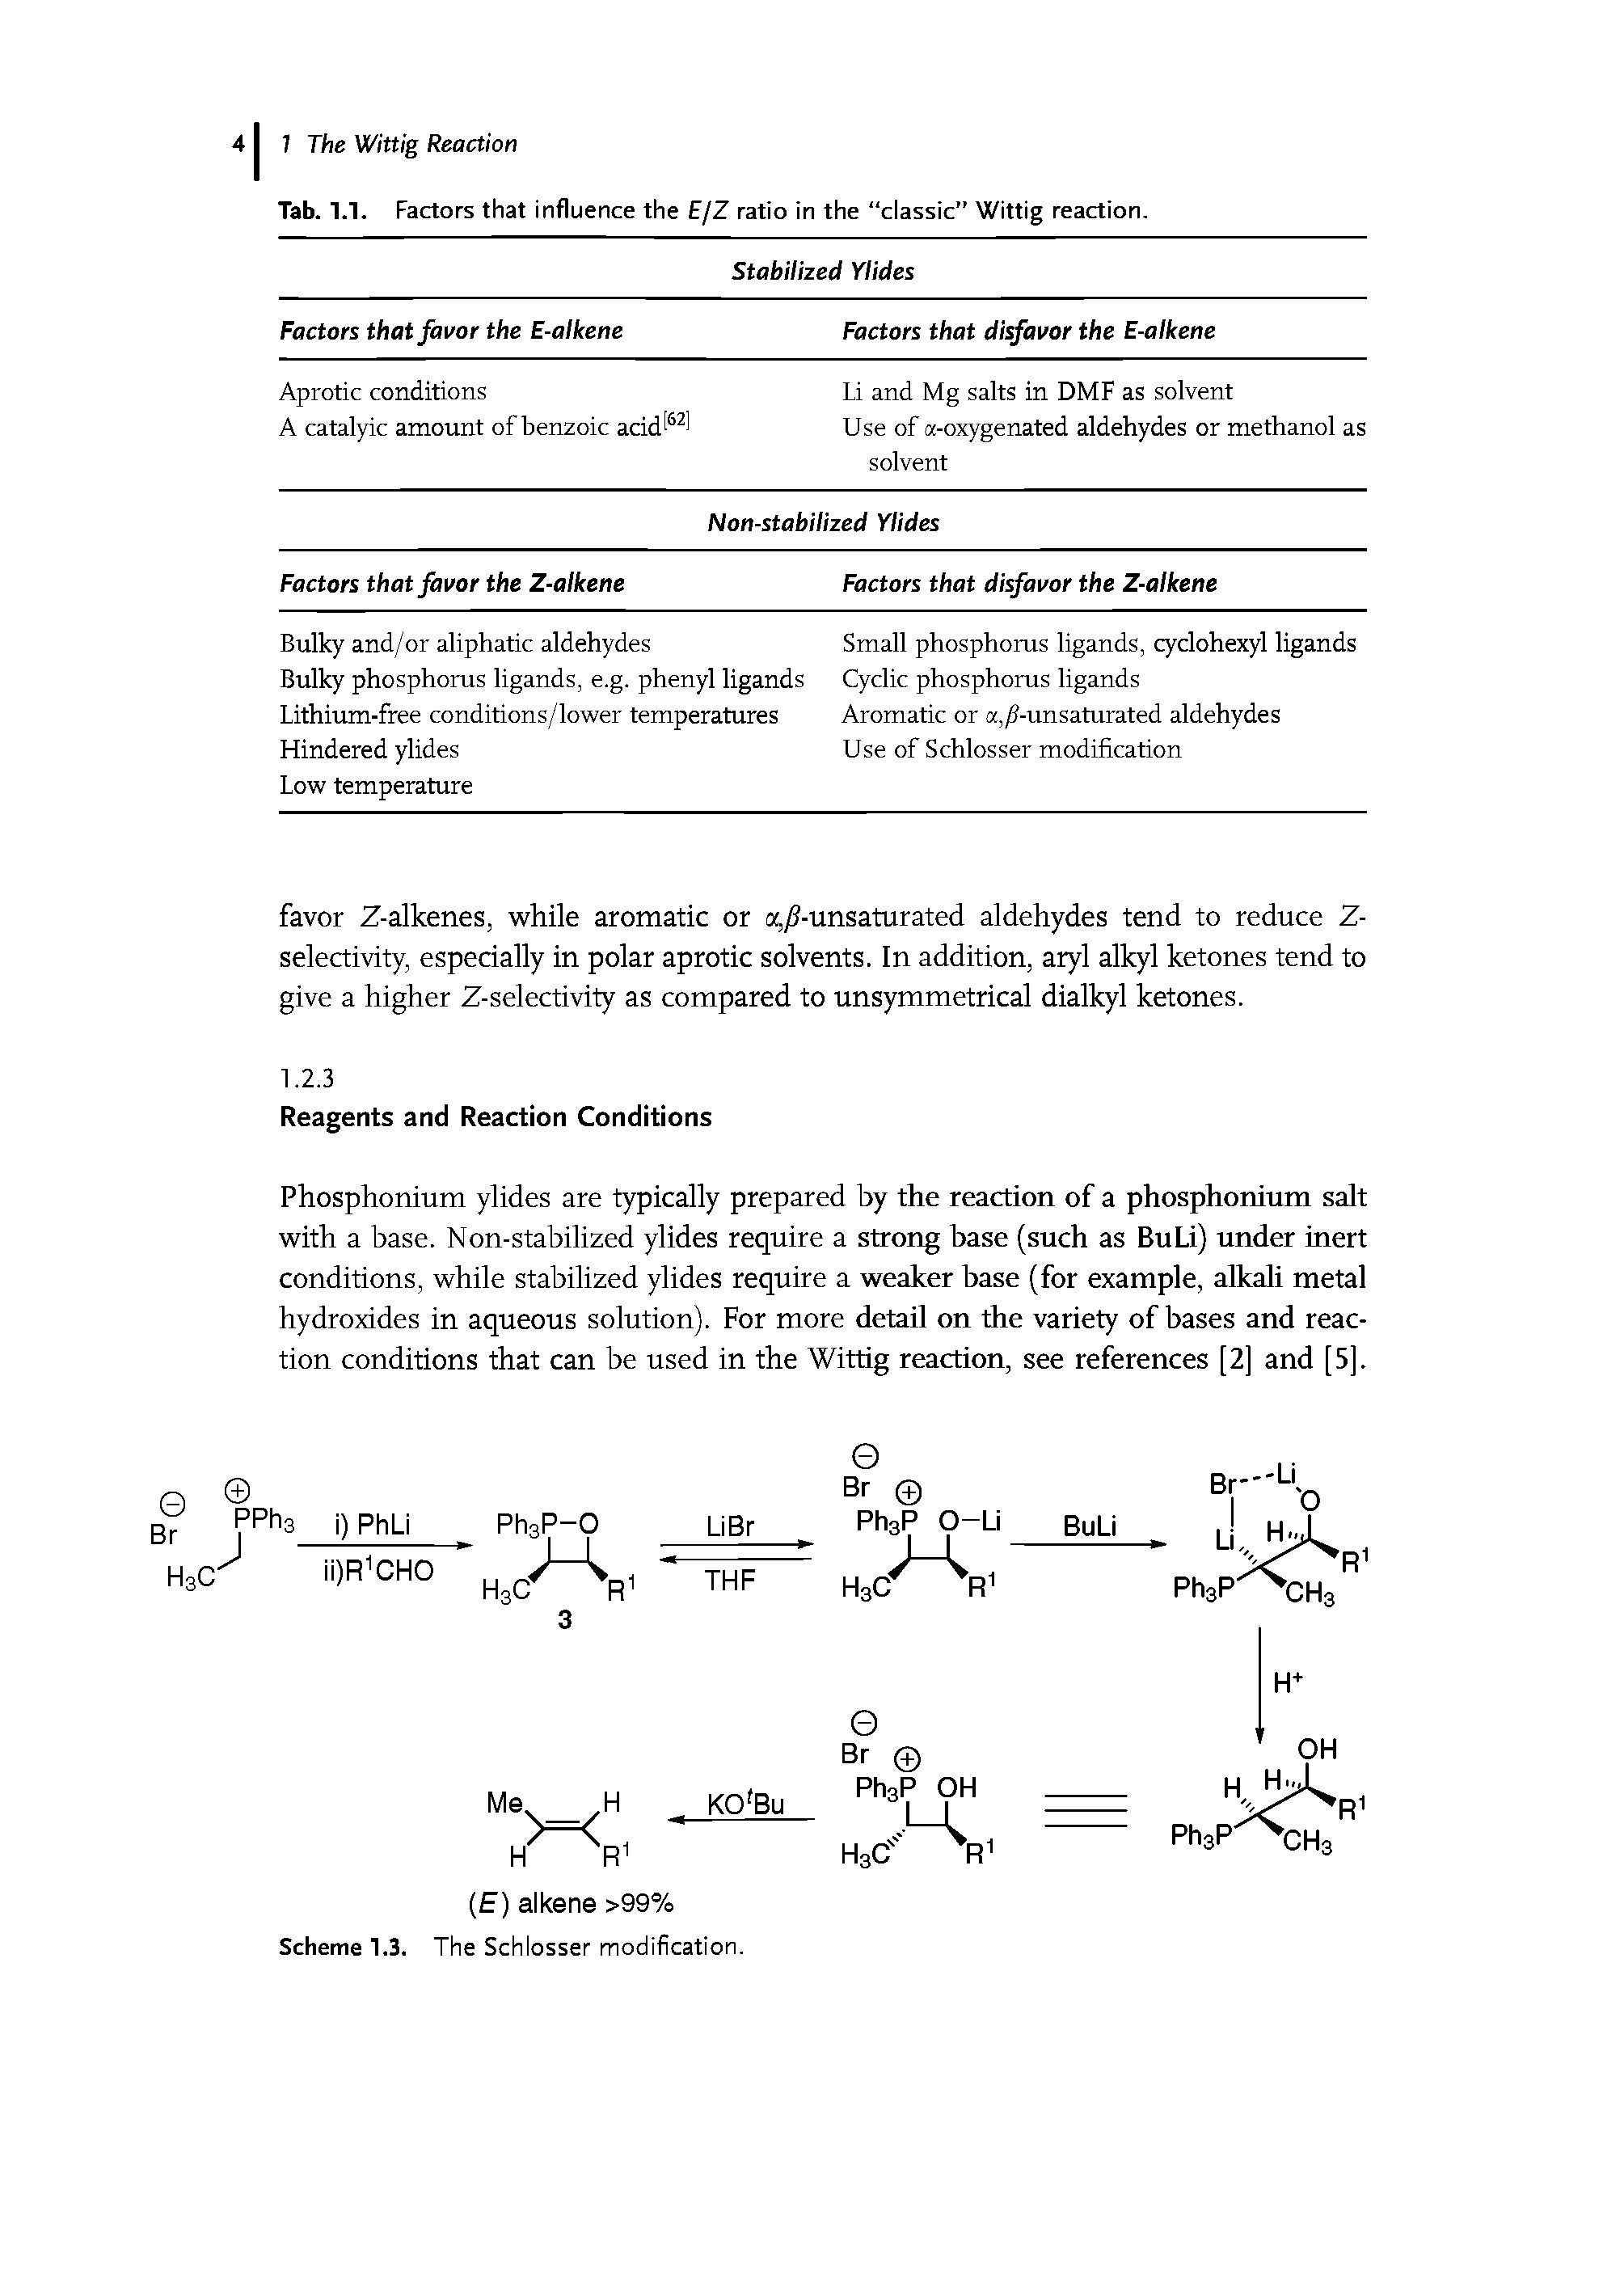 Tab. 1.1. Factors that influence the E/Z ratio in the classic" Wittig reaction.